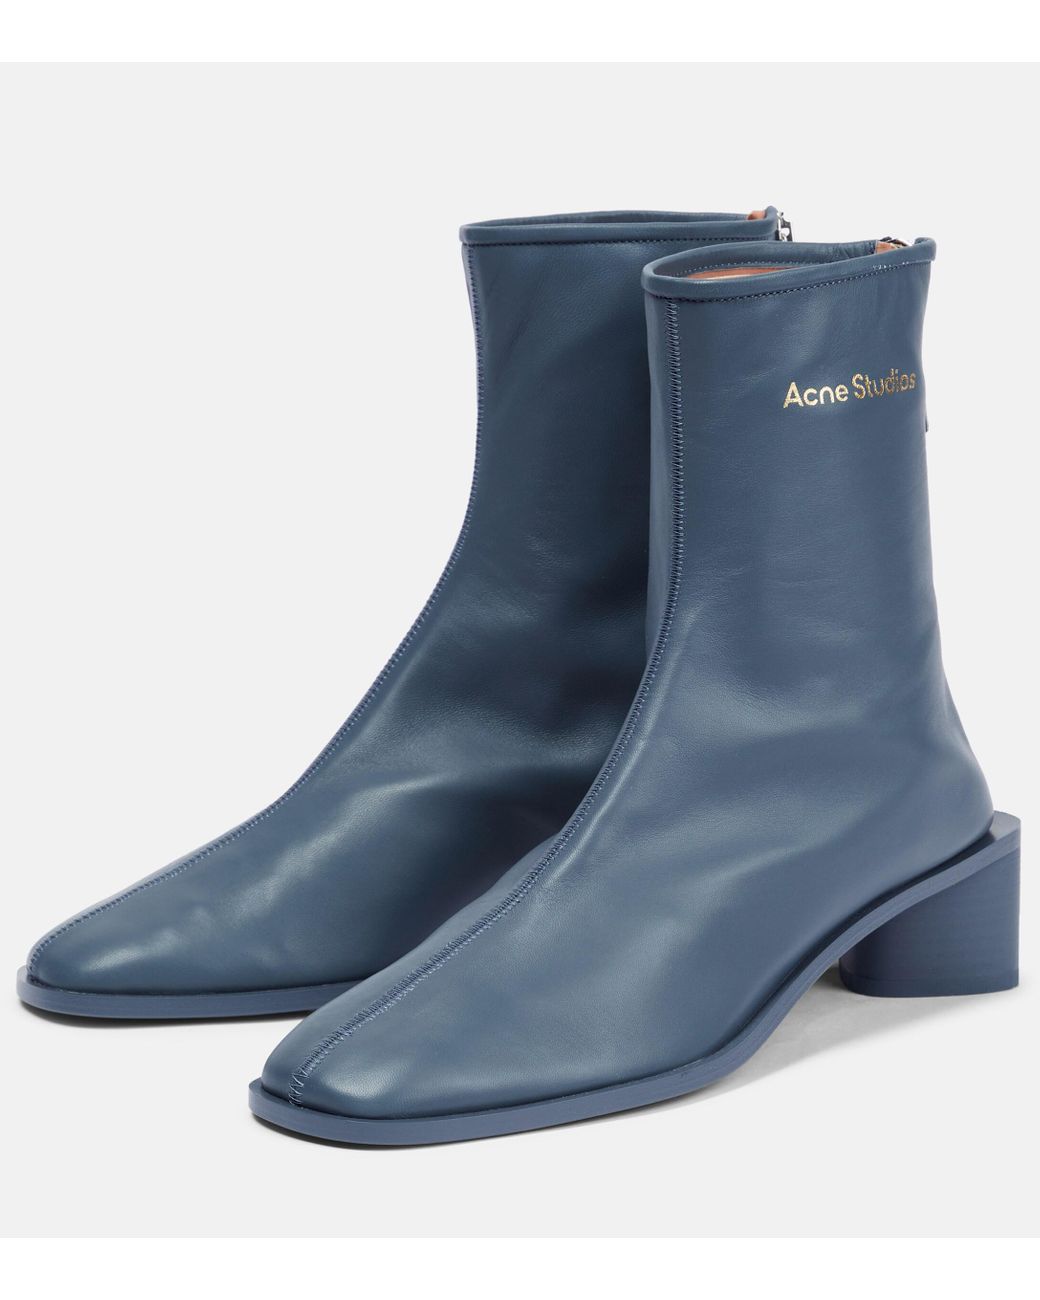 Acne Studios Bertine Leather Ankle Boots in Blue | Lyst Canada